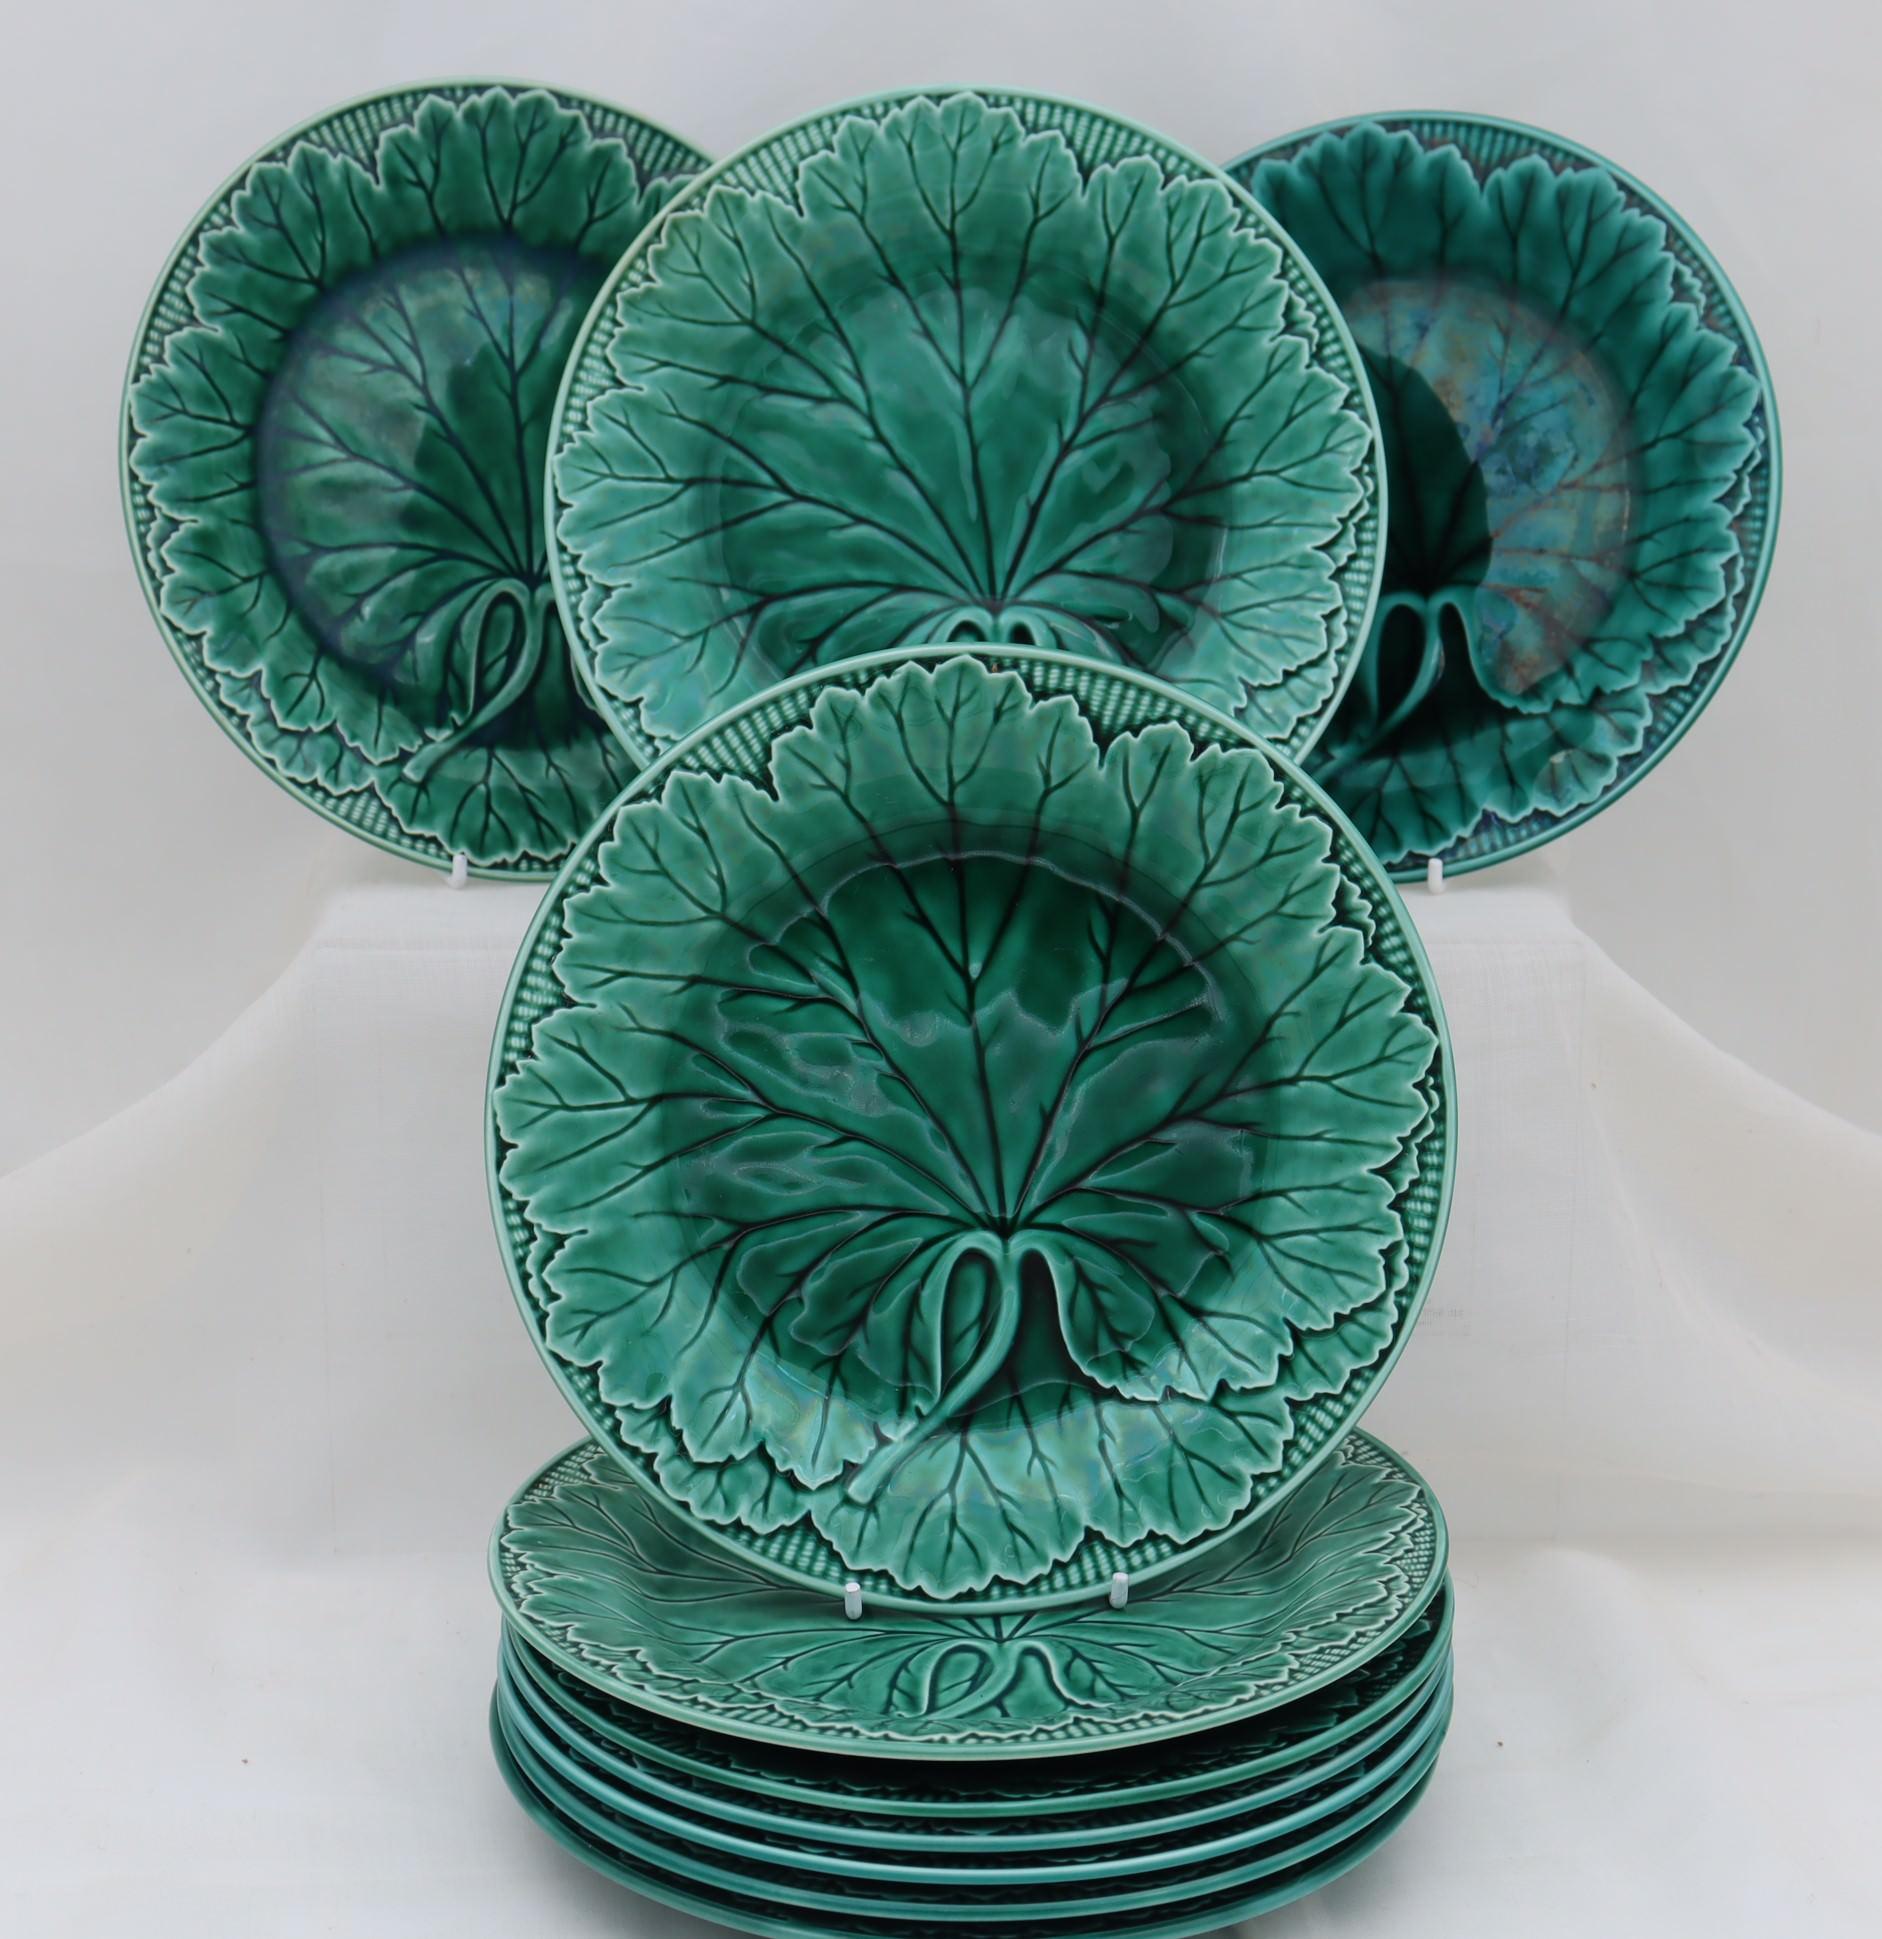 This set of ten Wedgwood Majolica plates all feature a moulded cabbage leaf decoration under a transparent green glaze. The diameter is 200 mm (8 inches) and they stand 25 mm (1 inch) high. They are in very good condition with no cracks or chips,